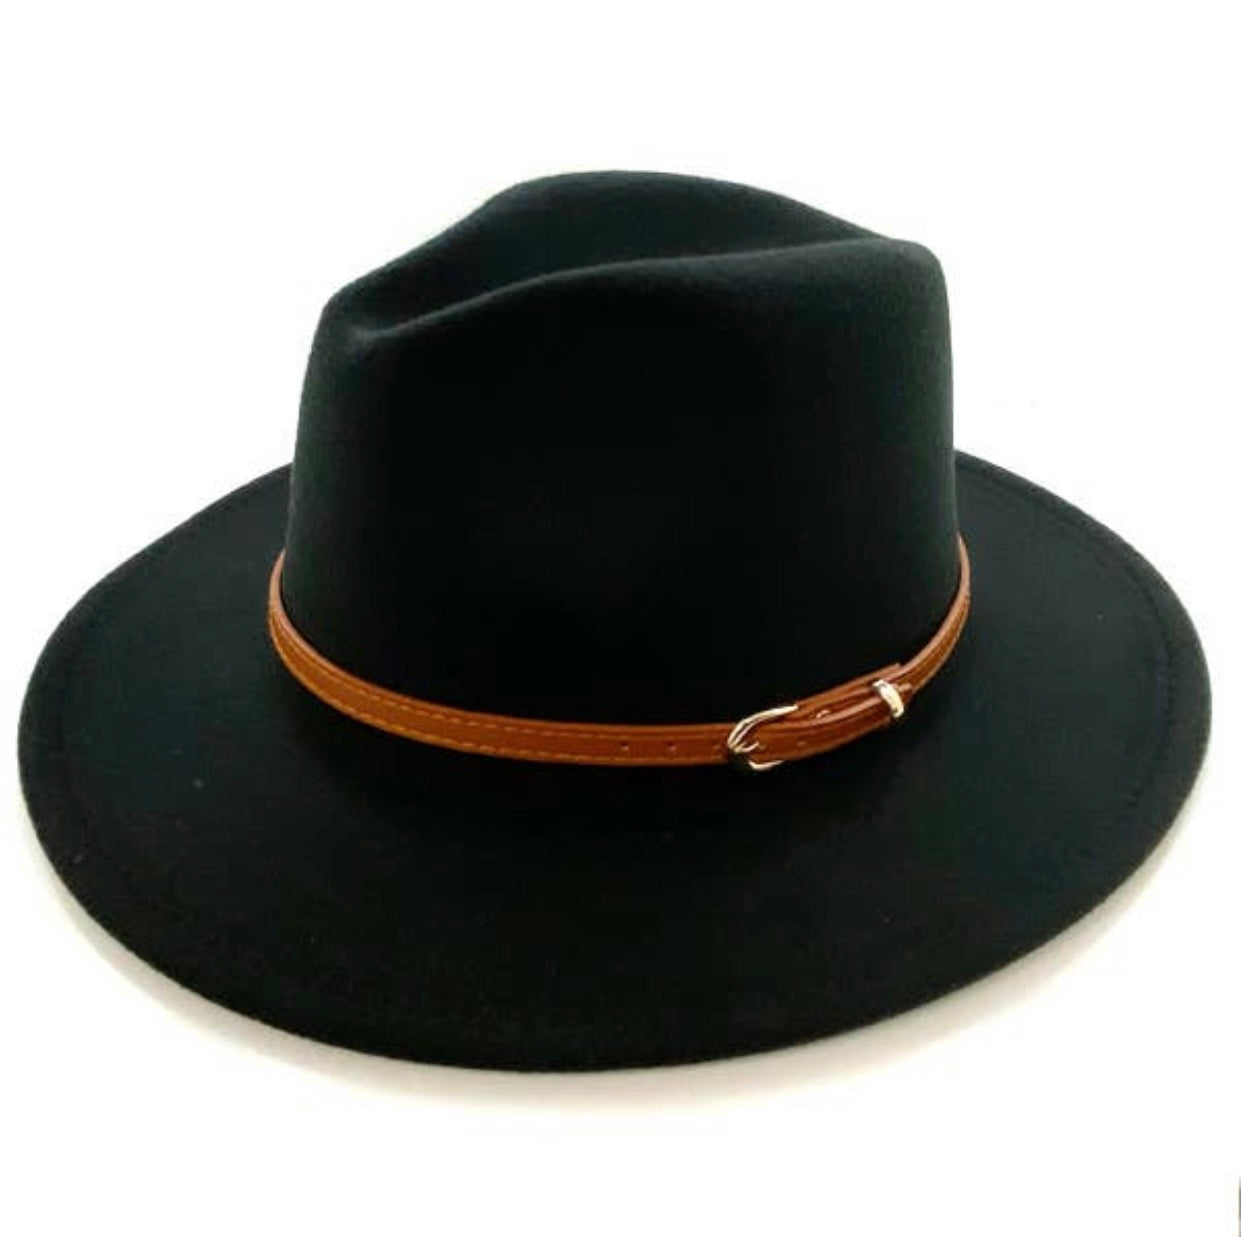 Retro Jazz hats with brown buckle band